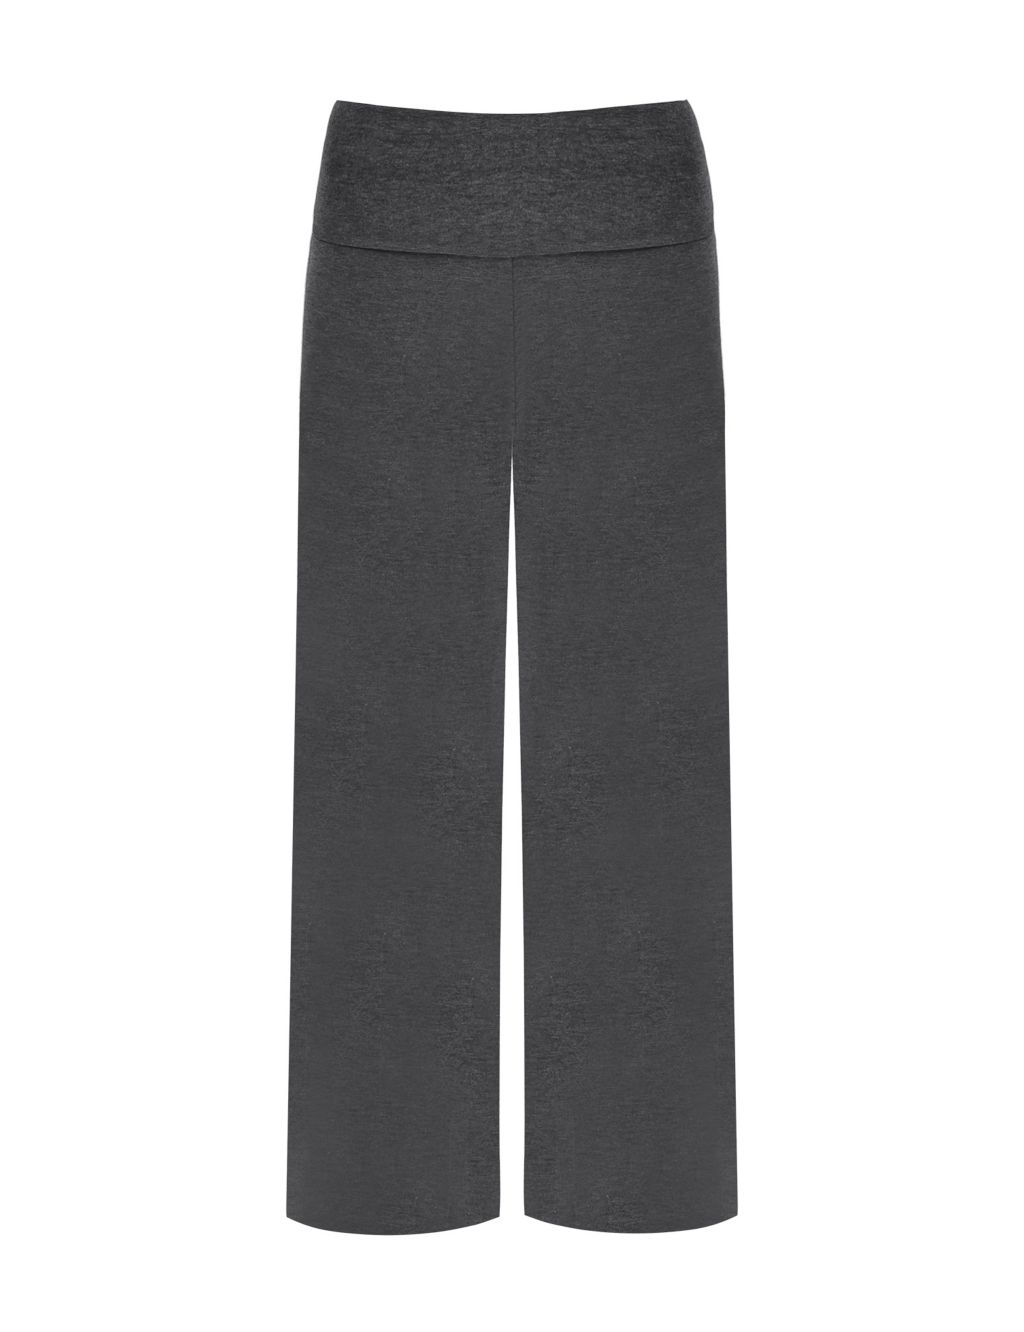 Marl Elasticated Waist Relaxed Trousers image 2